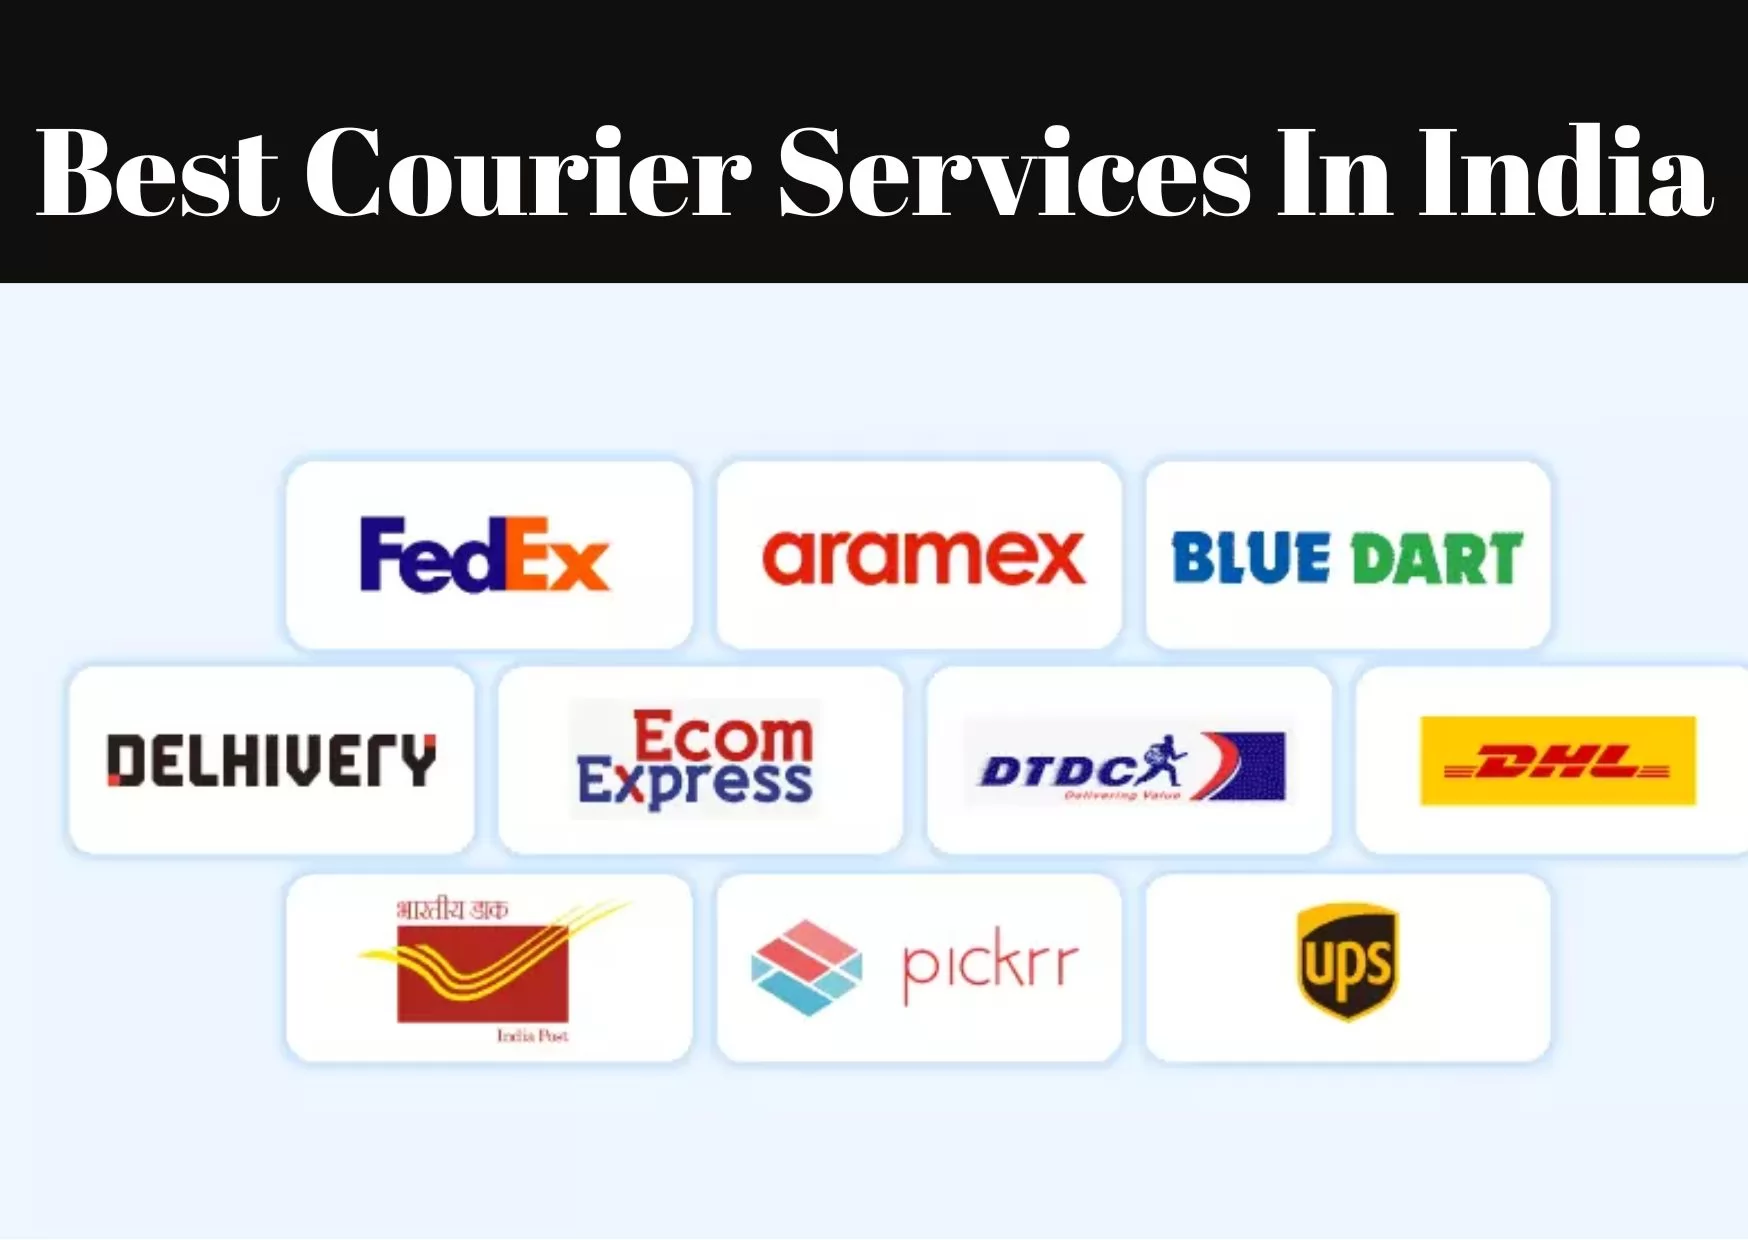 Best Courier Services In India